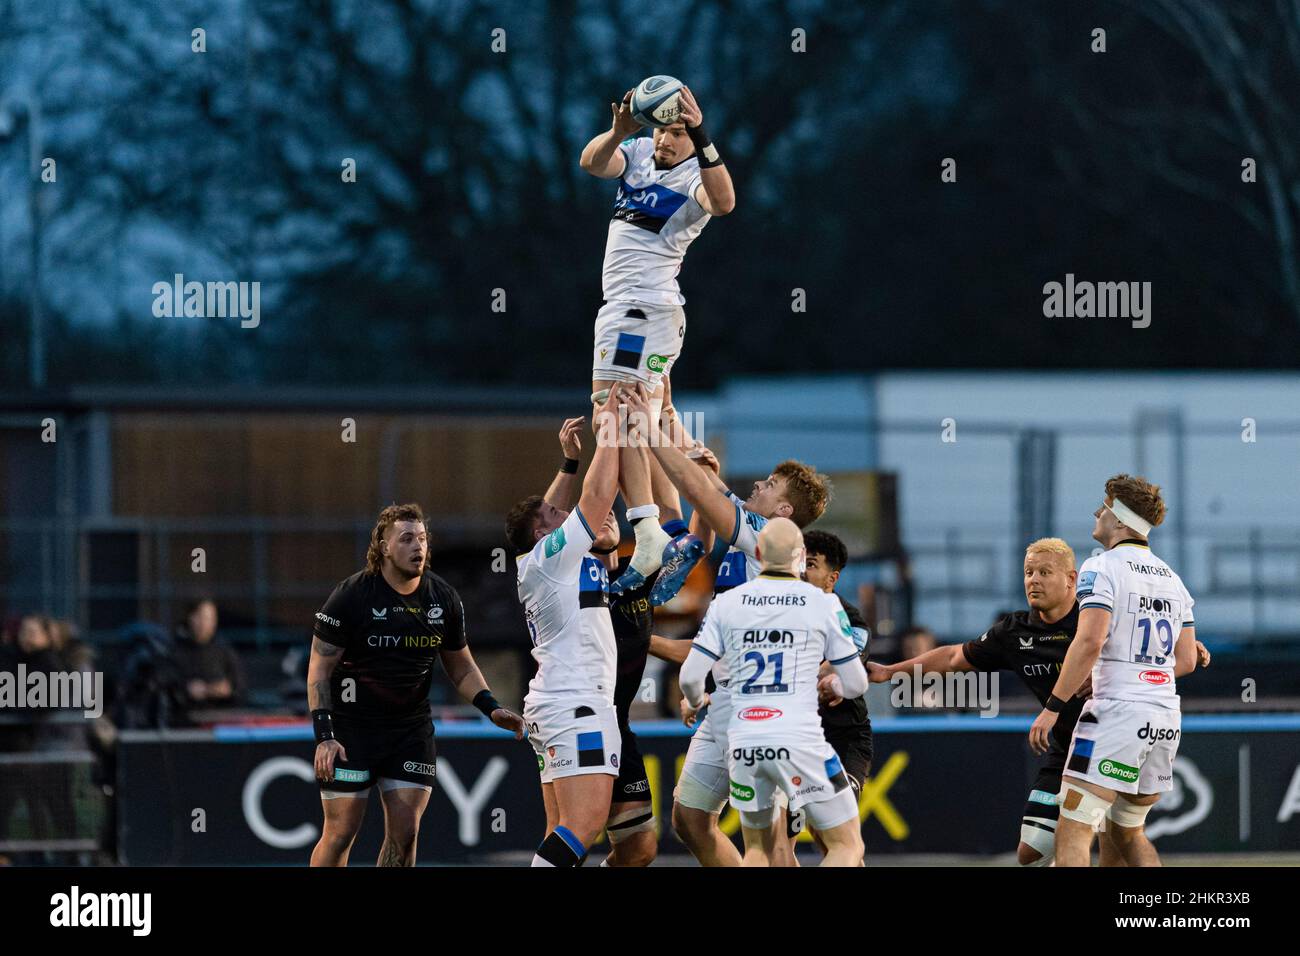 LONDON, UNITED KINGDOM. 05th, Feb 2022. Josh McNally of Bath (Capt.) caught the line-out ball during Gallagher Premiership Rugby Match between Saracens vs Bath Rugby at StoneX Stadium on Saturday, 05 February 2022. LONDON ENGLAND.  Credit: Taka Wu/Alamy Live News Stock Photo